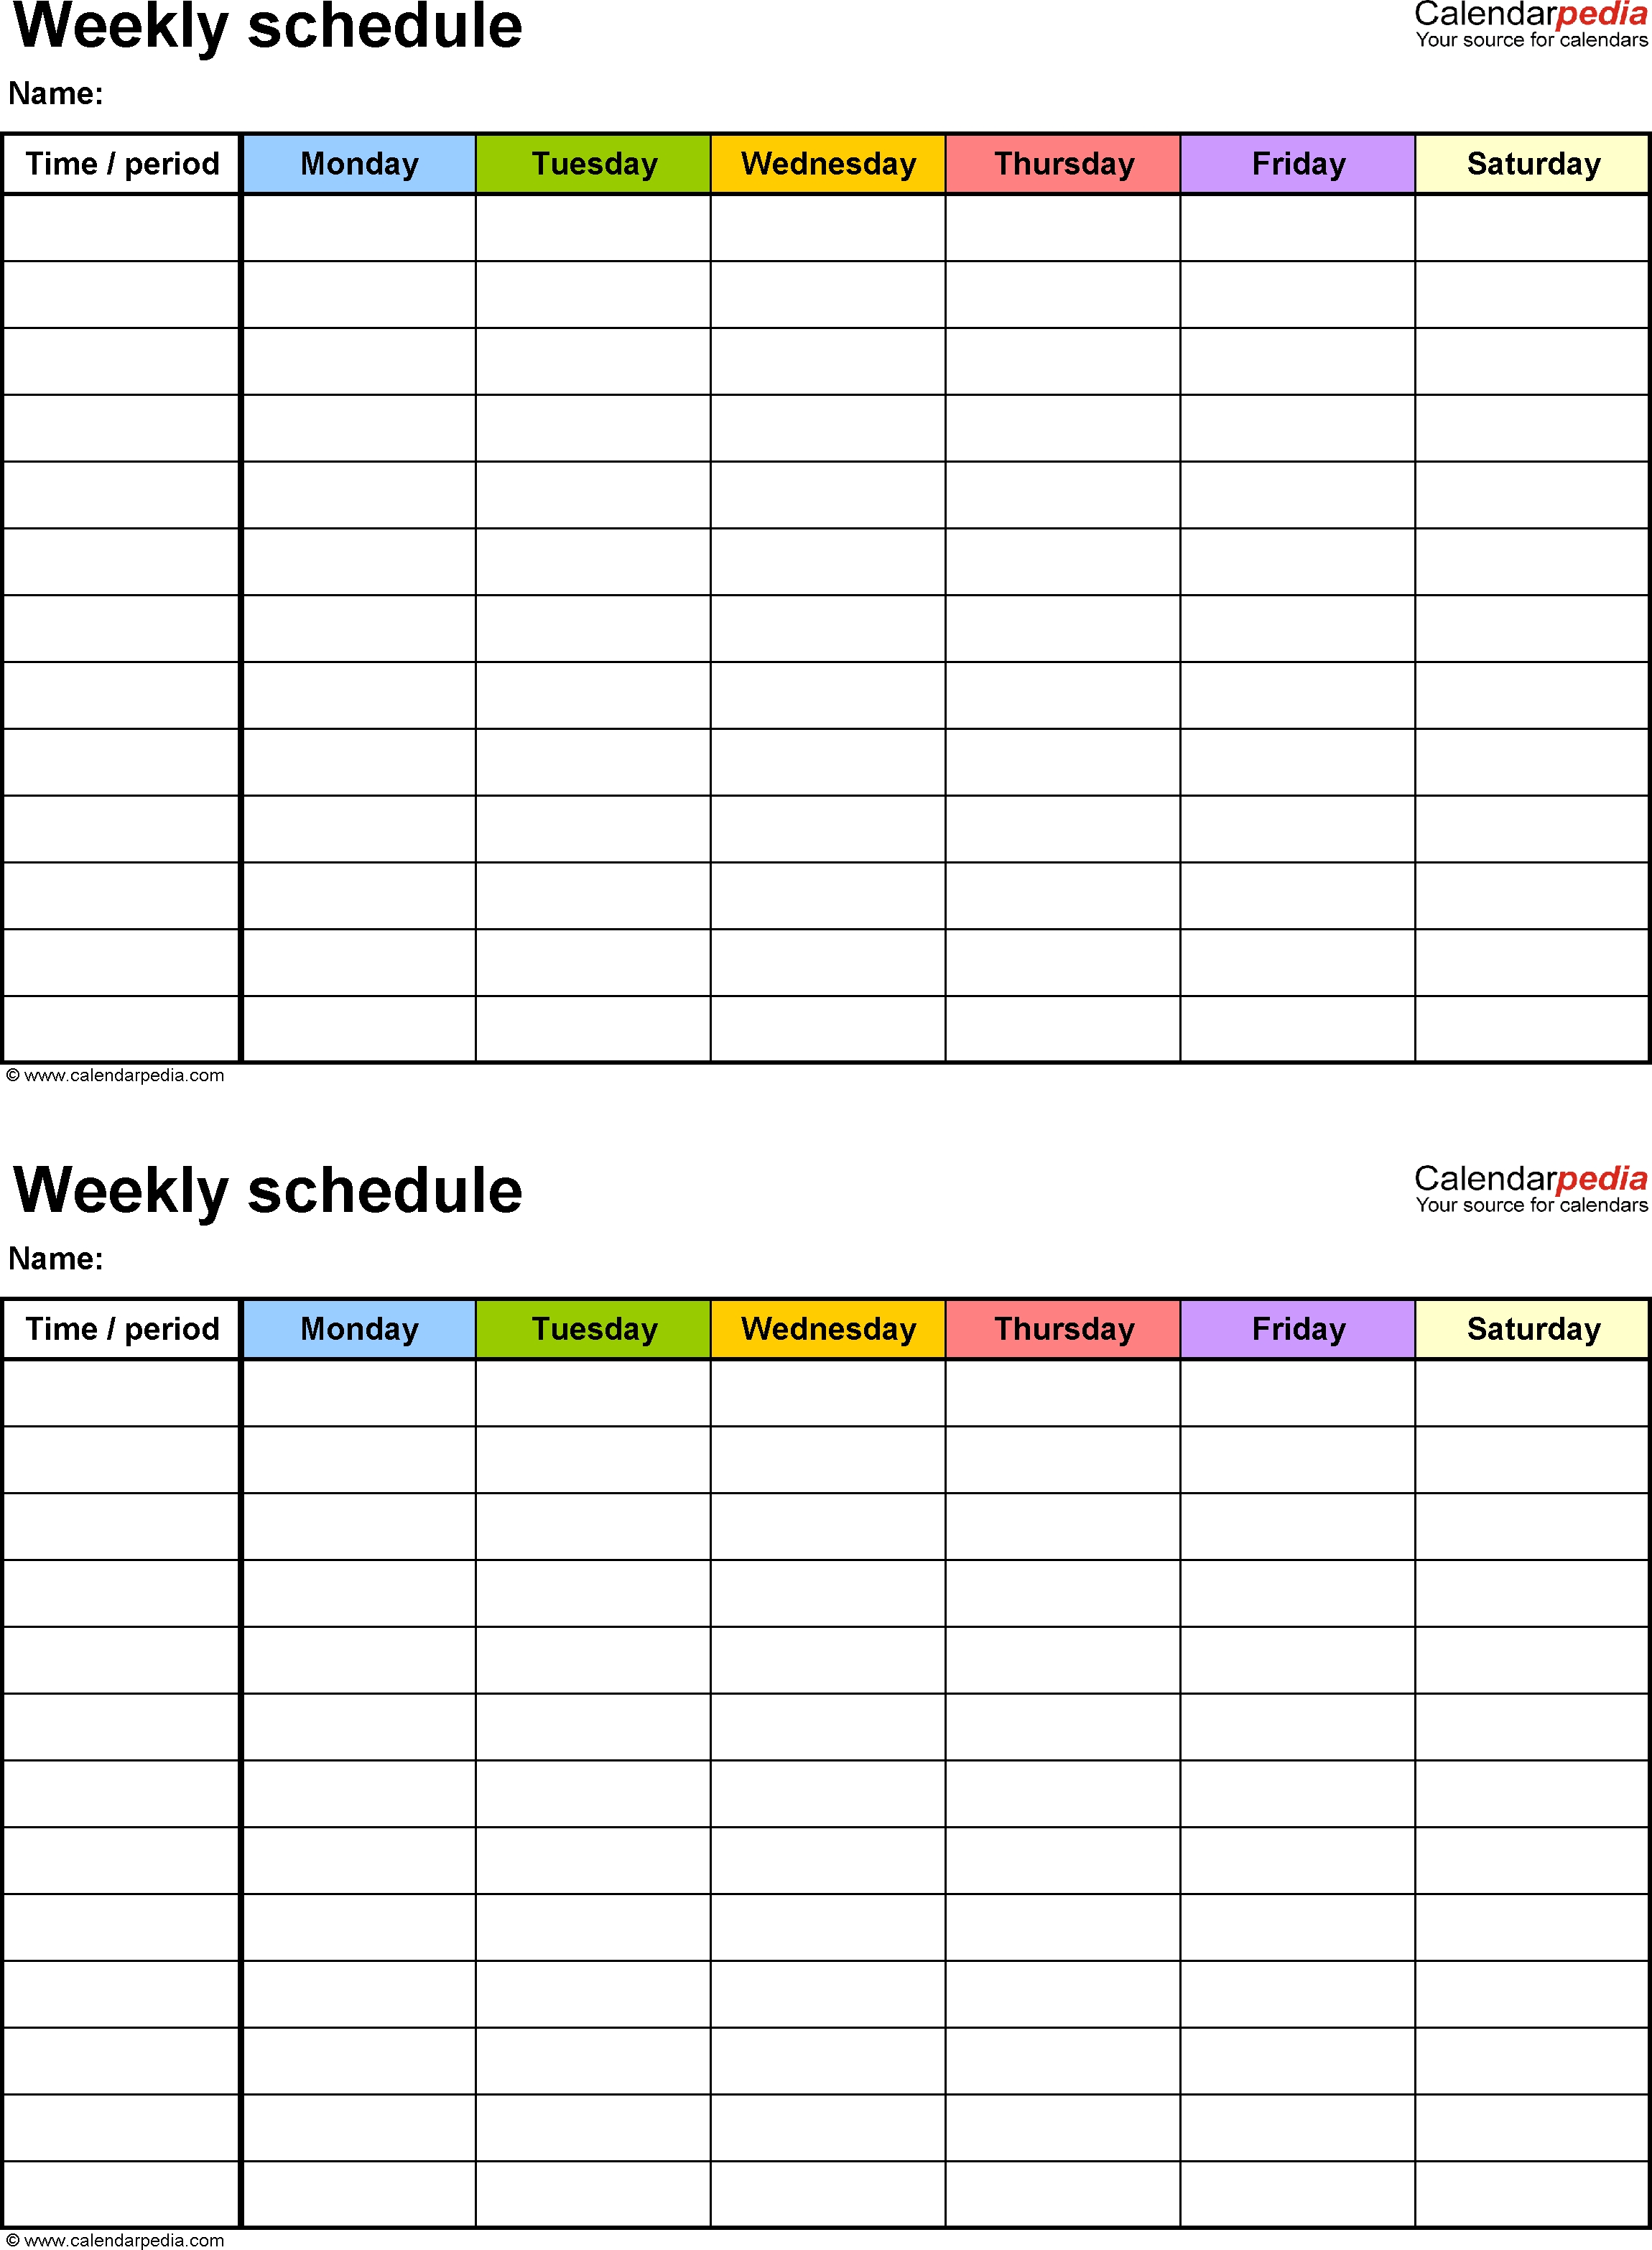 Free Weekly Schedule Templates For Pdf - 18 Templates  Free Weekly Calendar Templates Printable